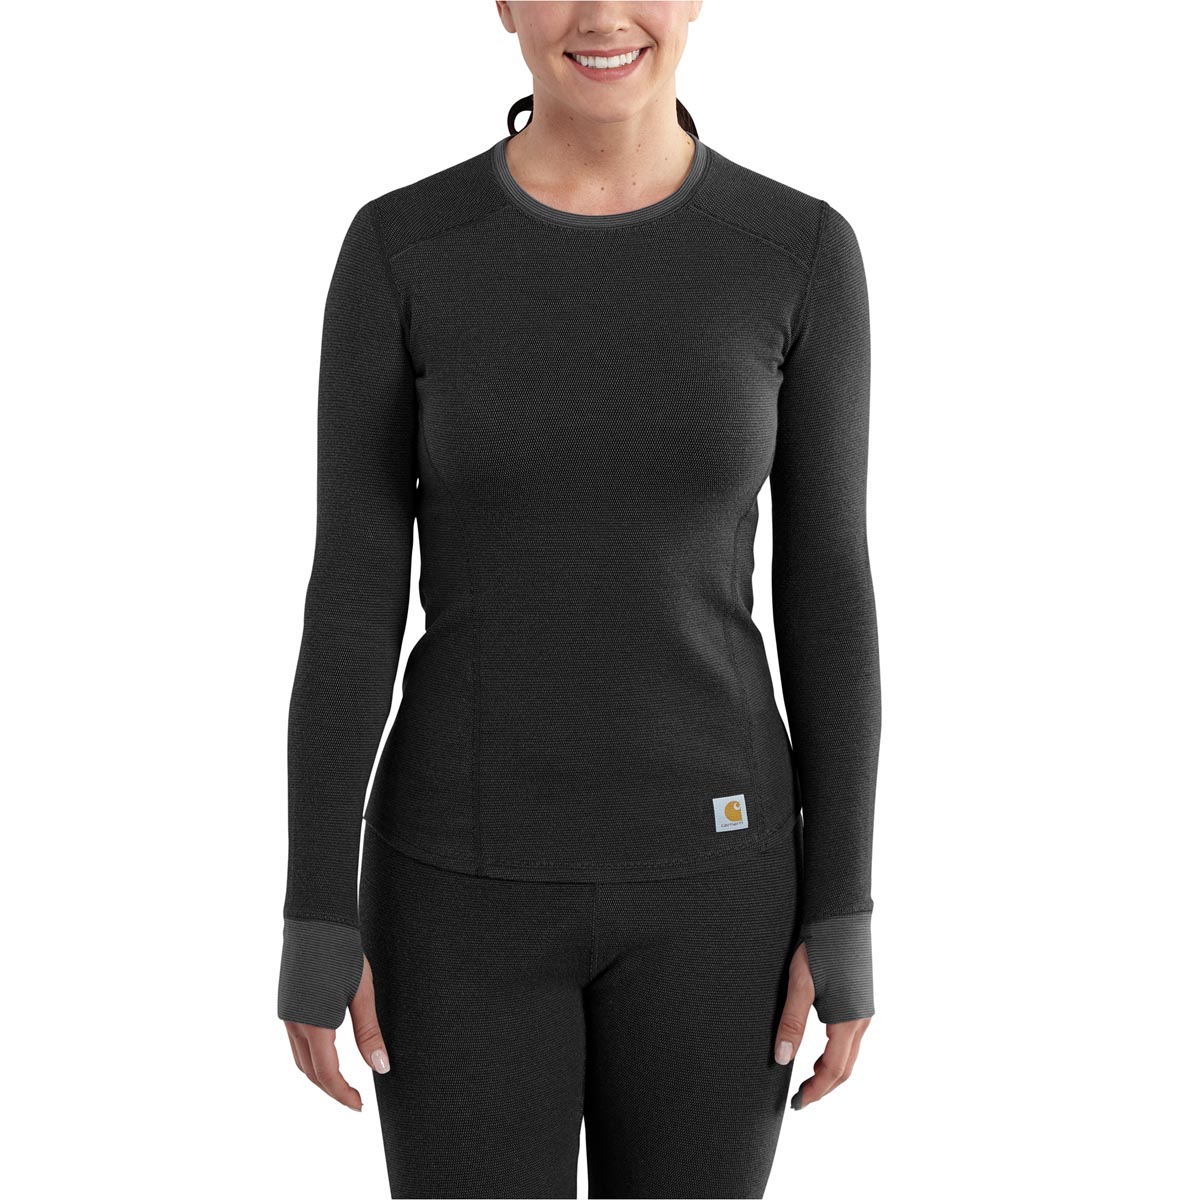 Carhartt Women's Base Force Cold Weather Crewneck Top